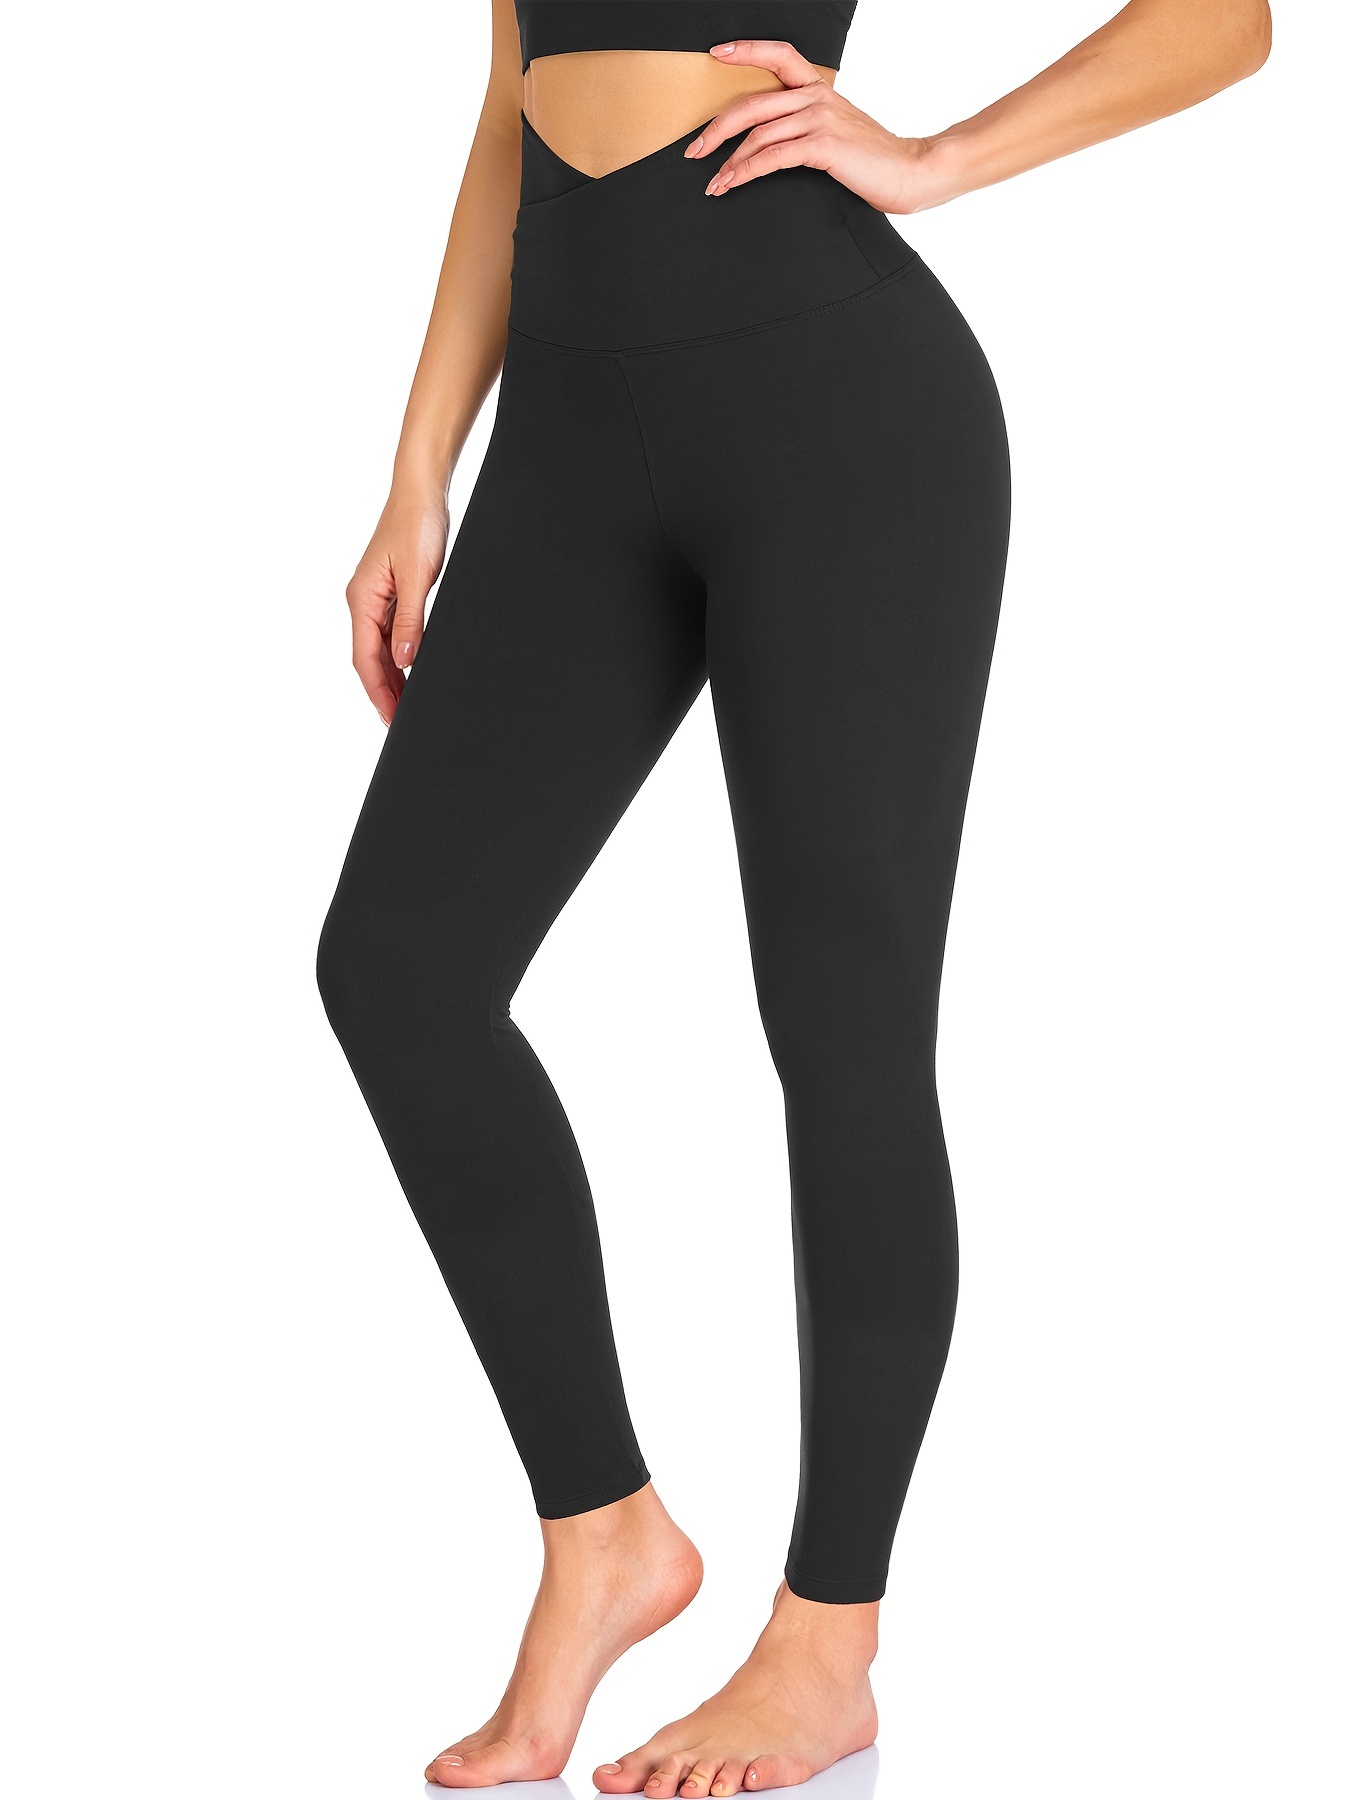 V Cross Waist Sports Leggings For Women, Seamless Tummy Control Soft  Workout Running High Waisted Non See Through Yoga Pants, Women's Activewear